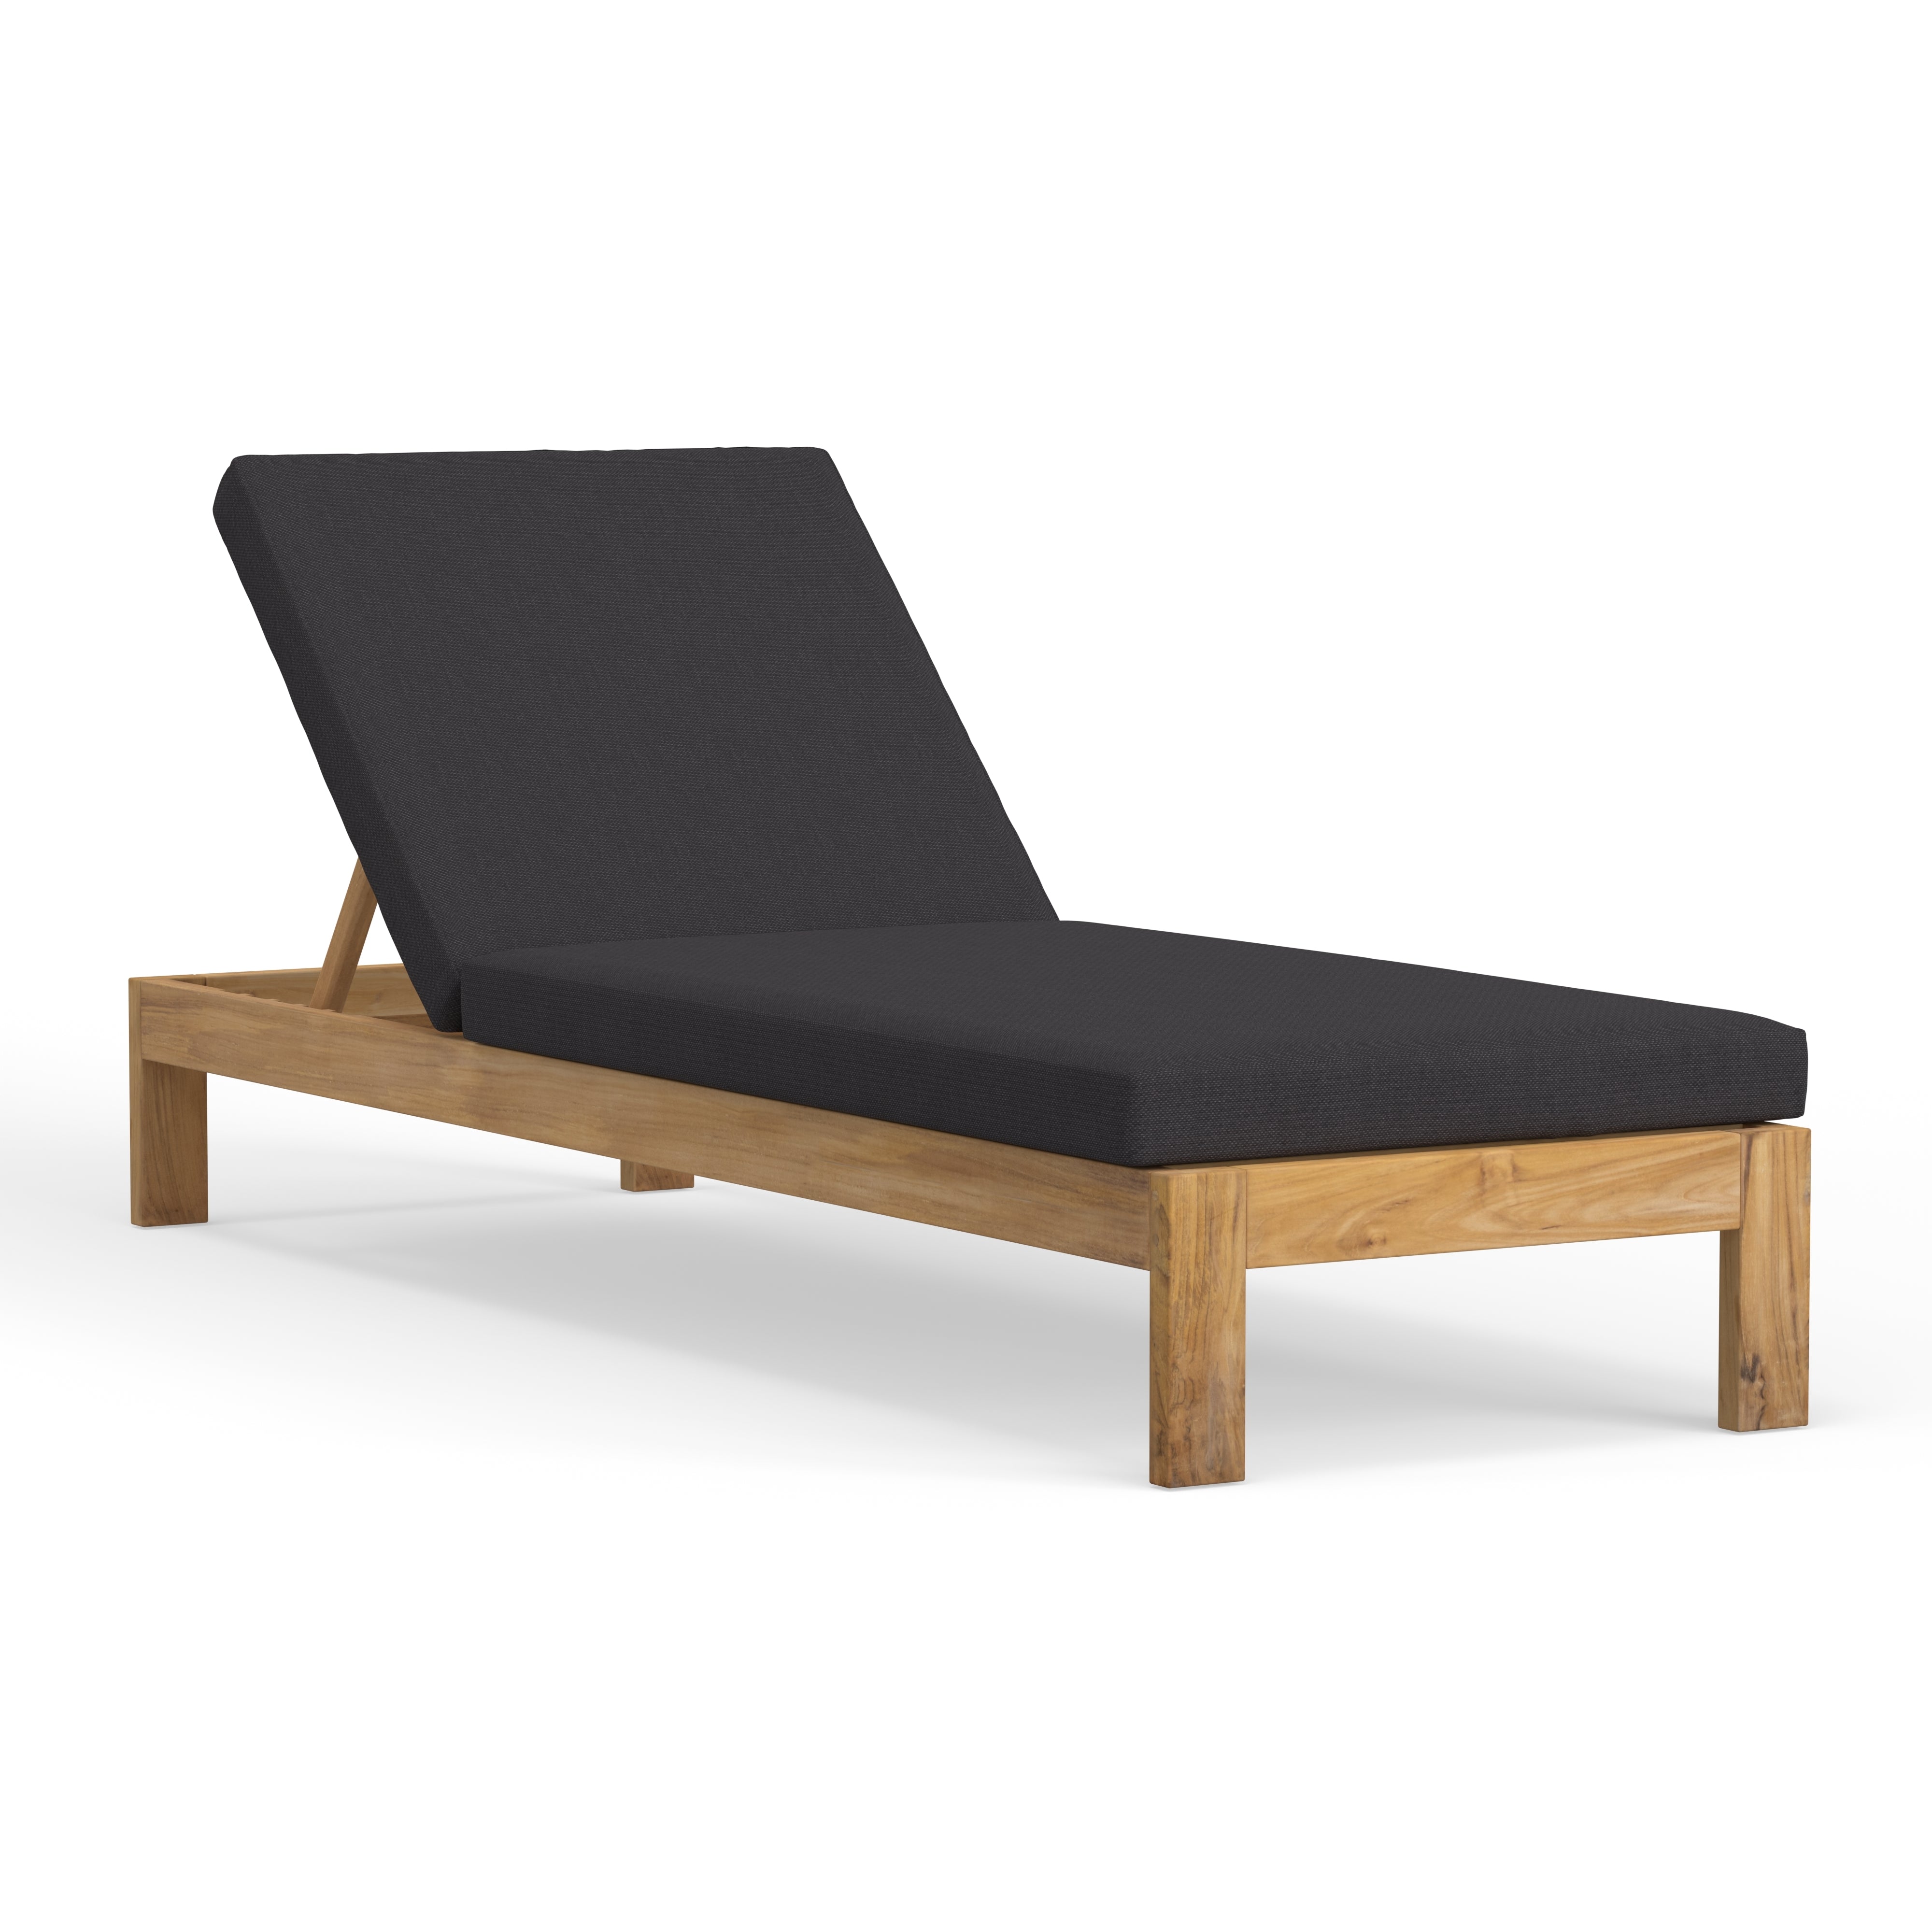 Most Comfortable Chaise Lounge Made From The Best Outdoor Materials